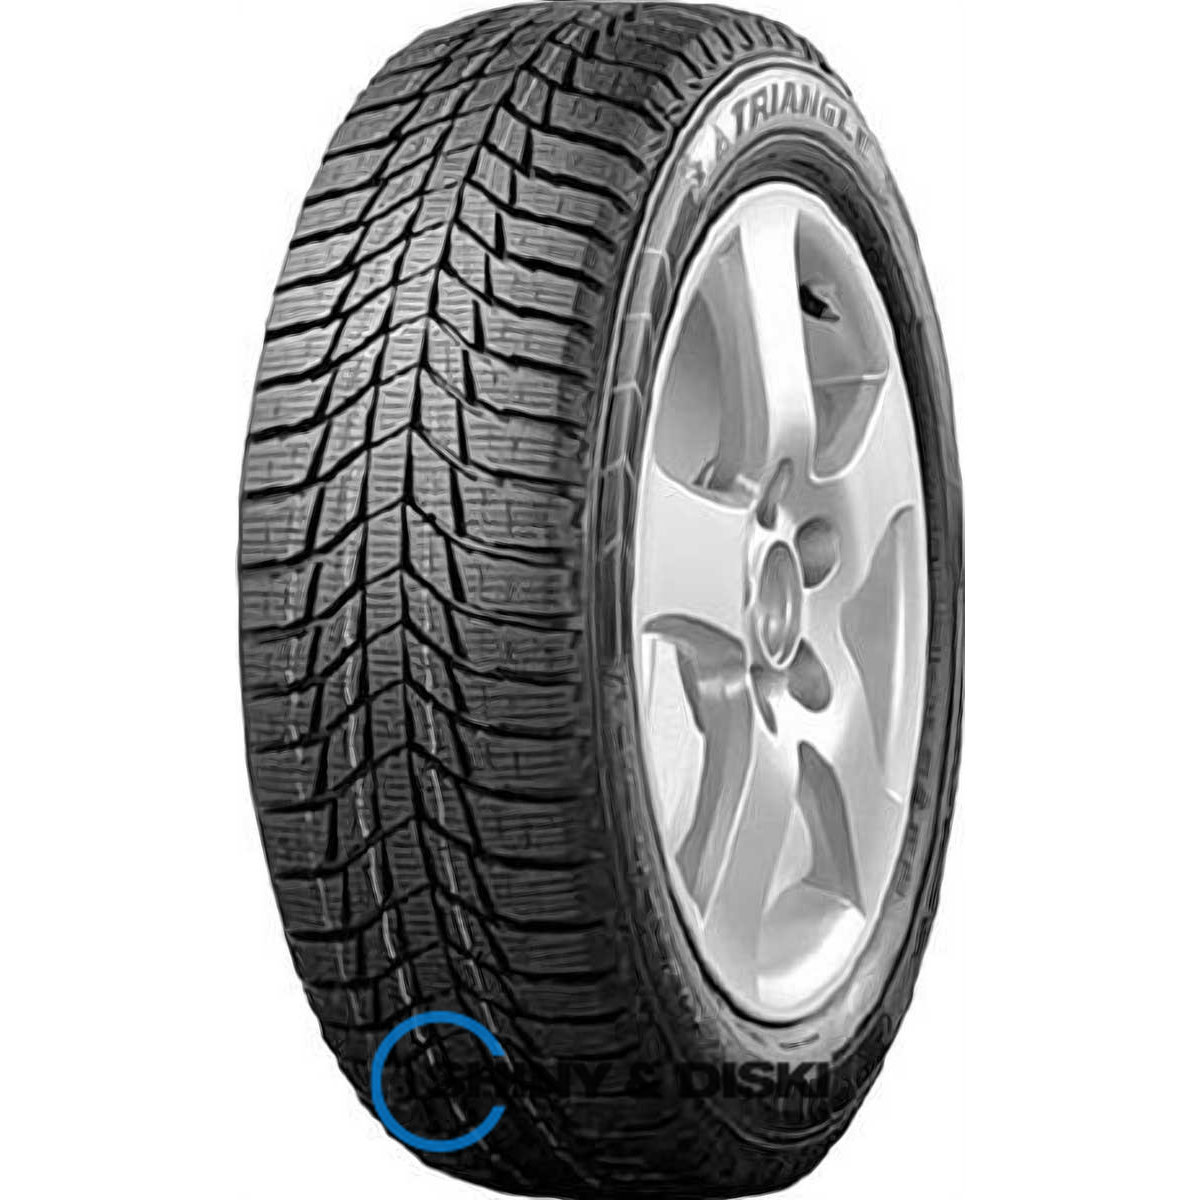 покрышки triangle pl01 235/60 r16 96r